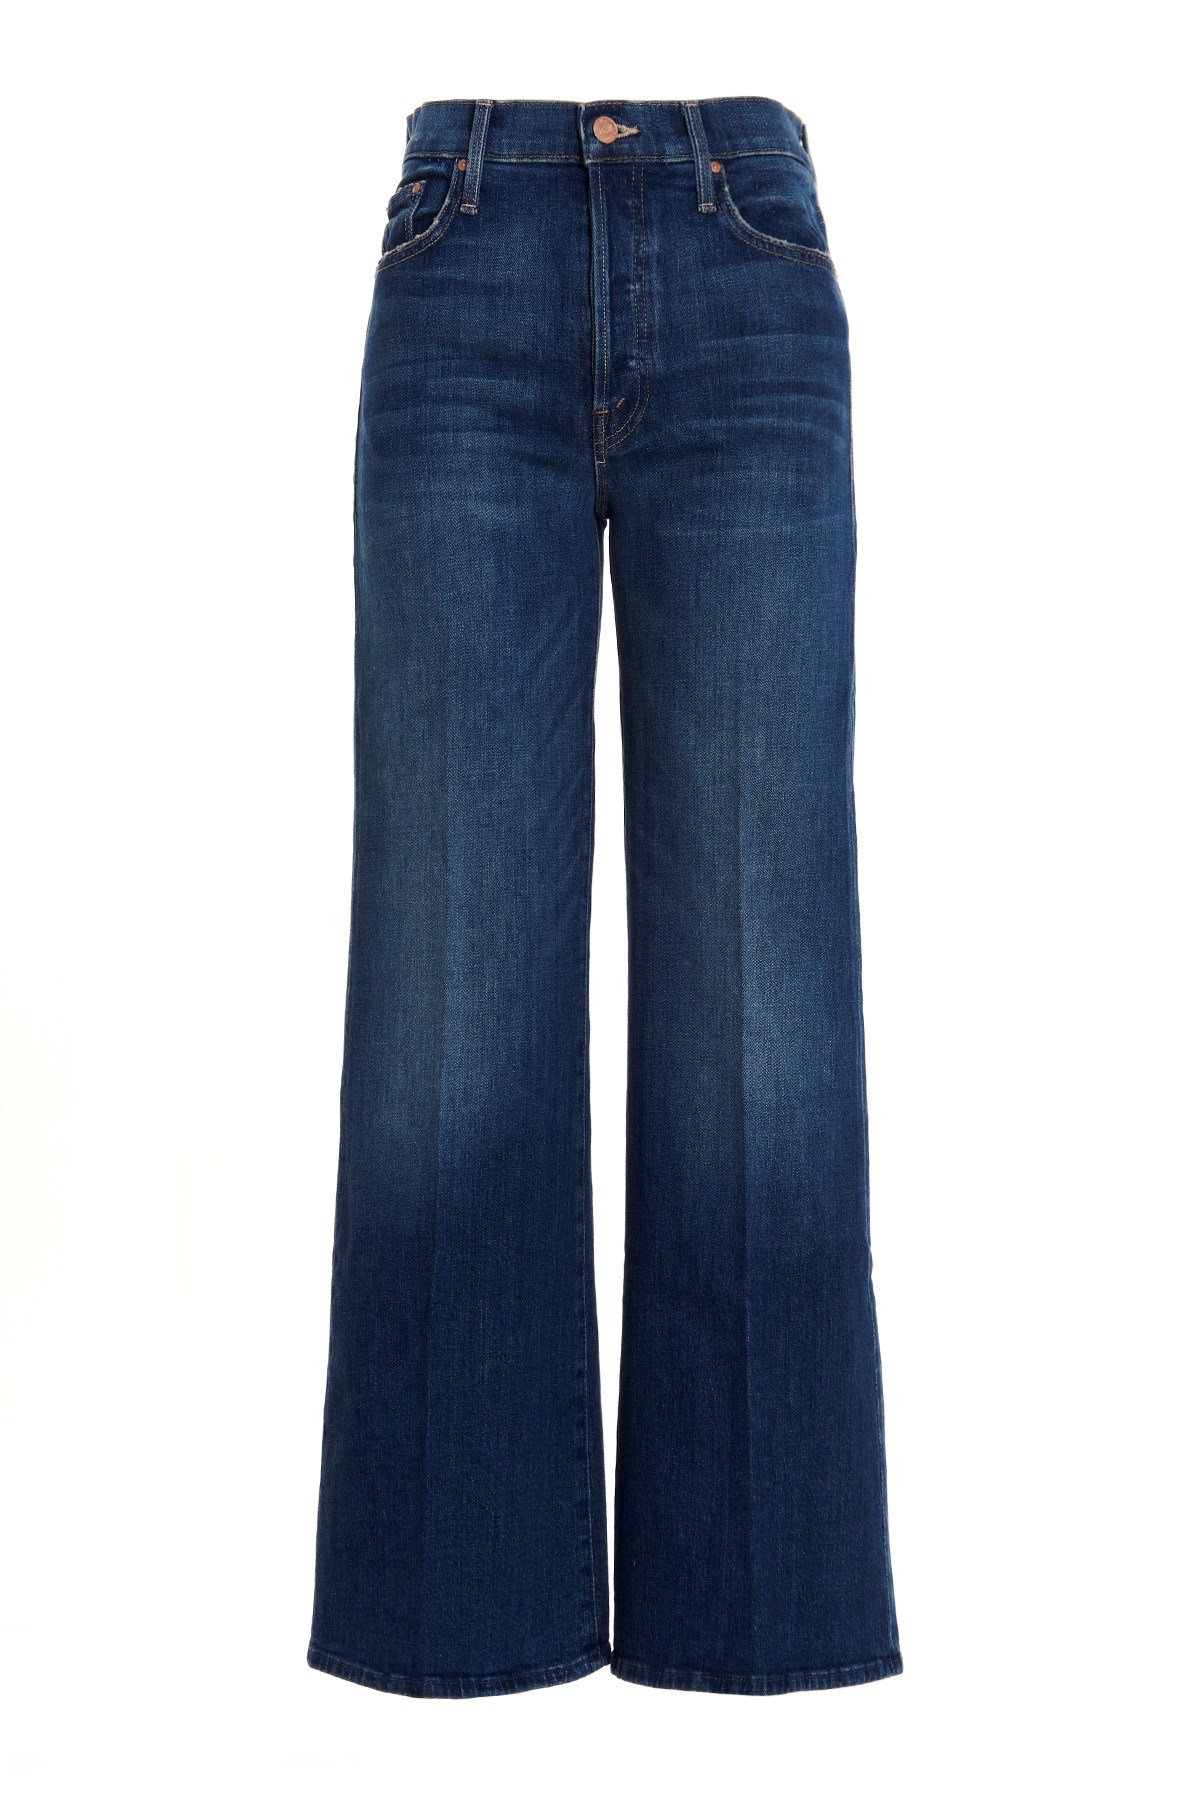 MOTHER 'The Tomcat Roller’ Jeans